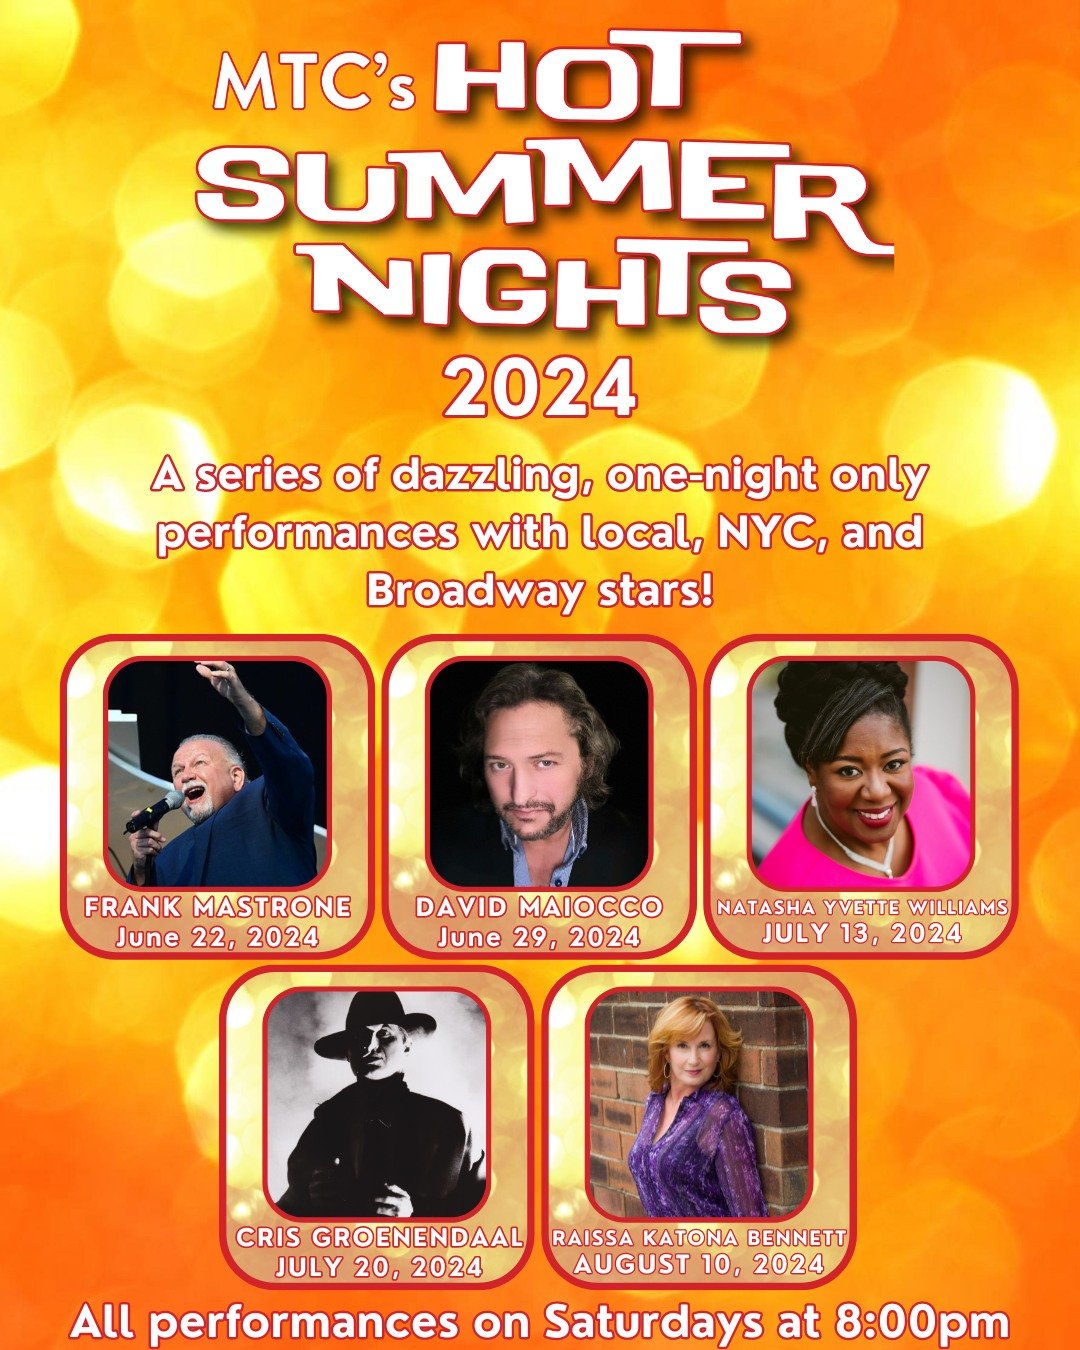 ☀️ALL-STAR PERFORMANCES BEGIN IN JUNE!☀️

Your &quot;hot summer nights&quot; just became cooler! Join us on select Saturday evenings beginning in June for MTC's annual HOT SUMMER NIGHTS performance series! From Broadway's Frank Mastrone, Cris Groenen